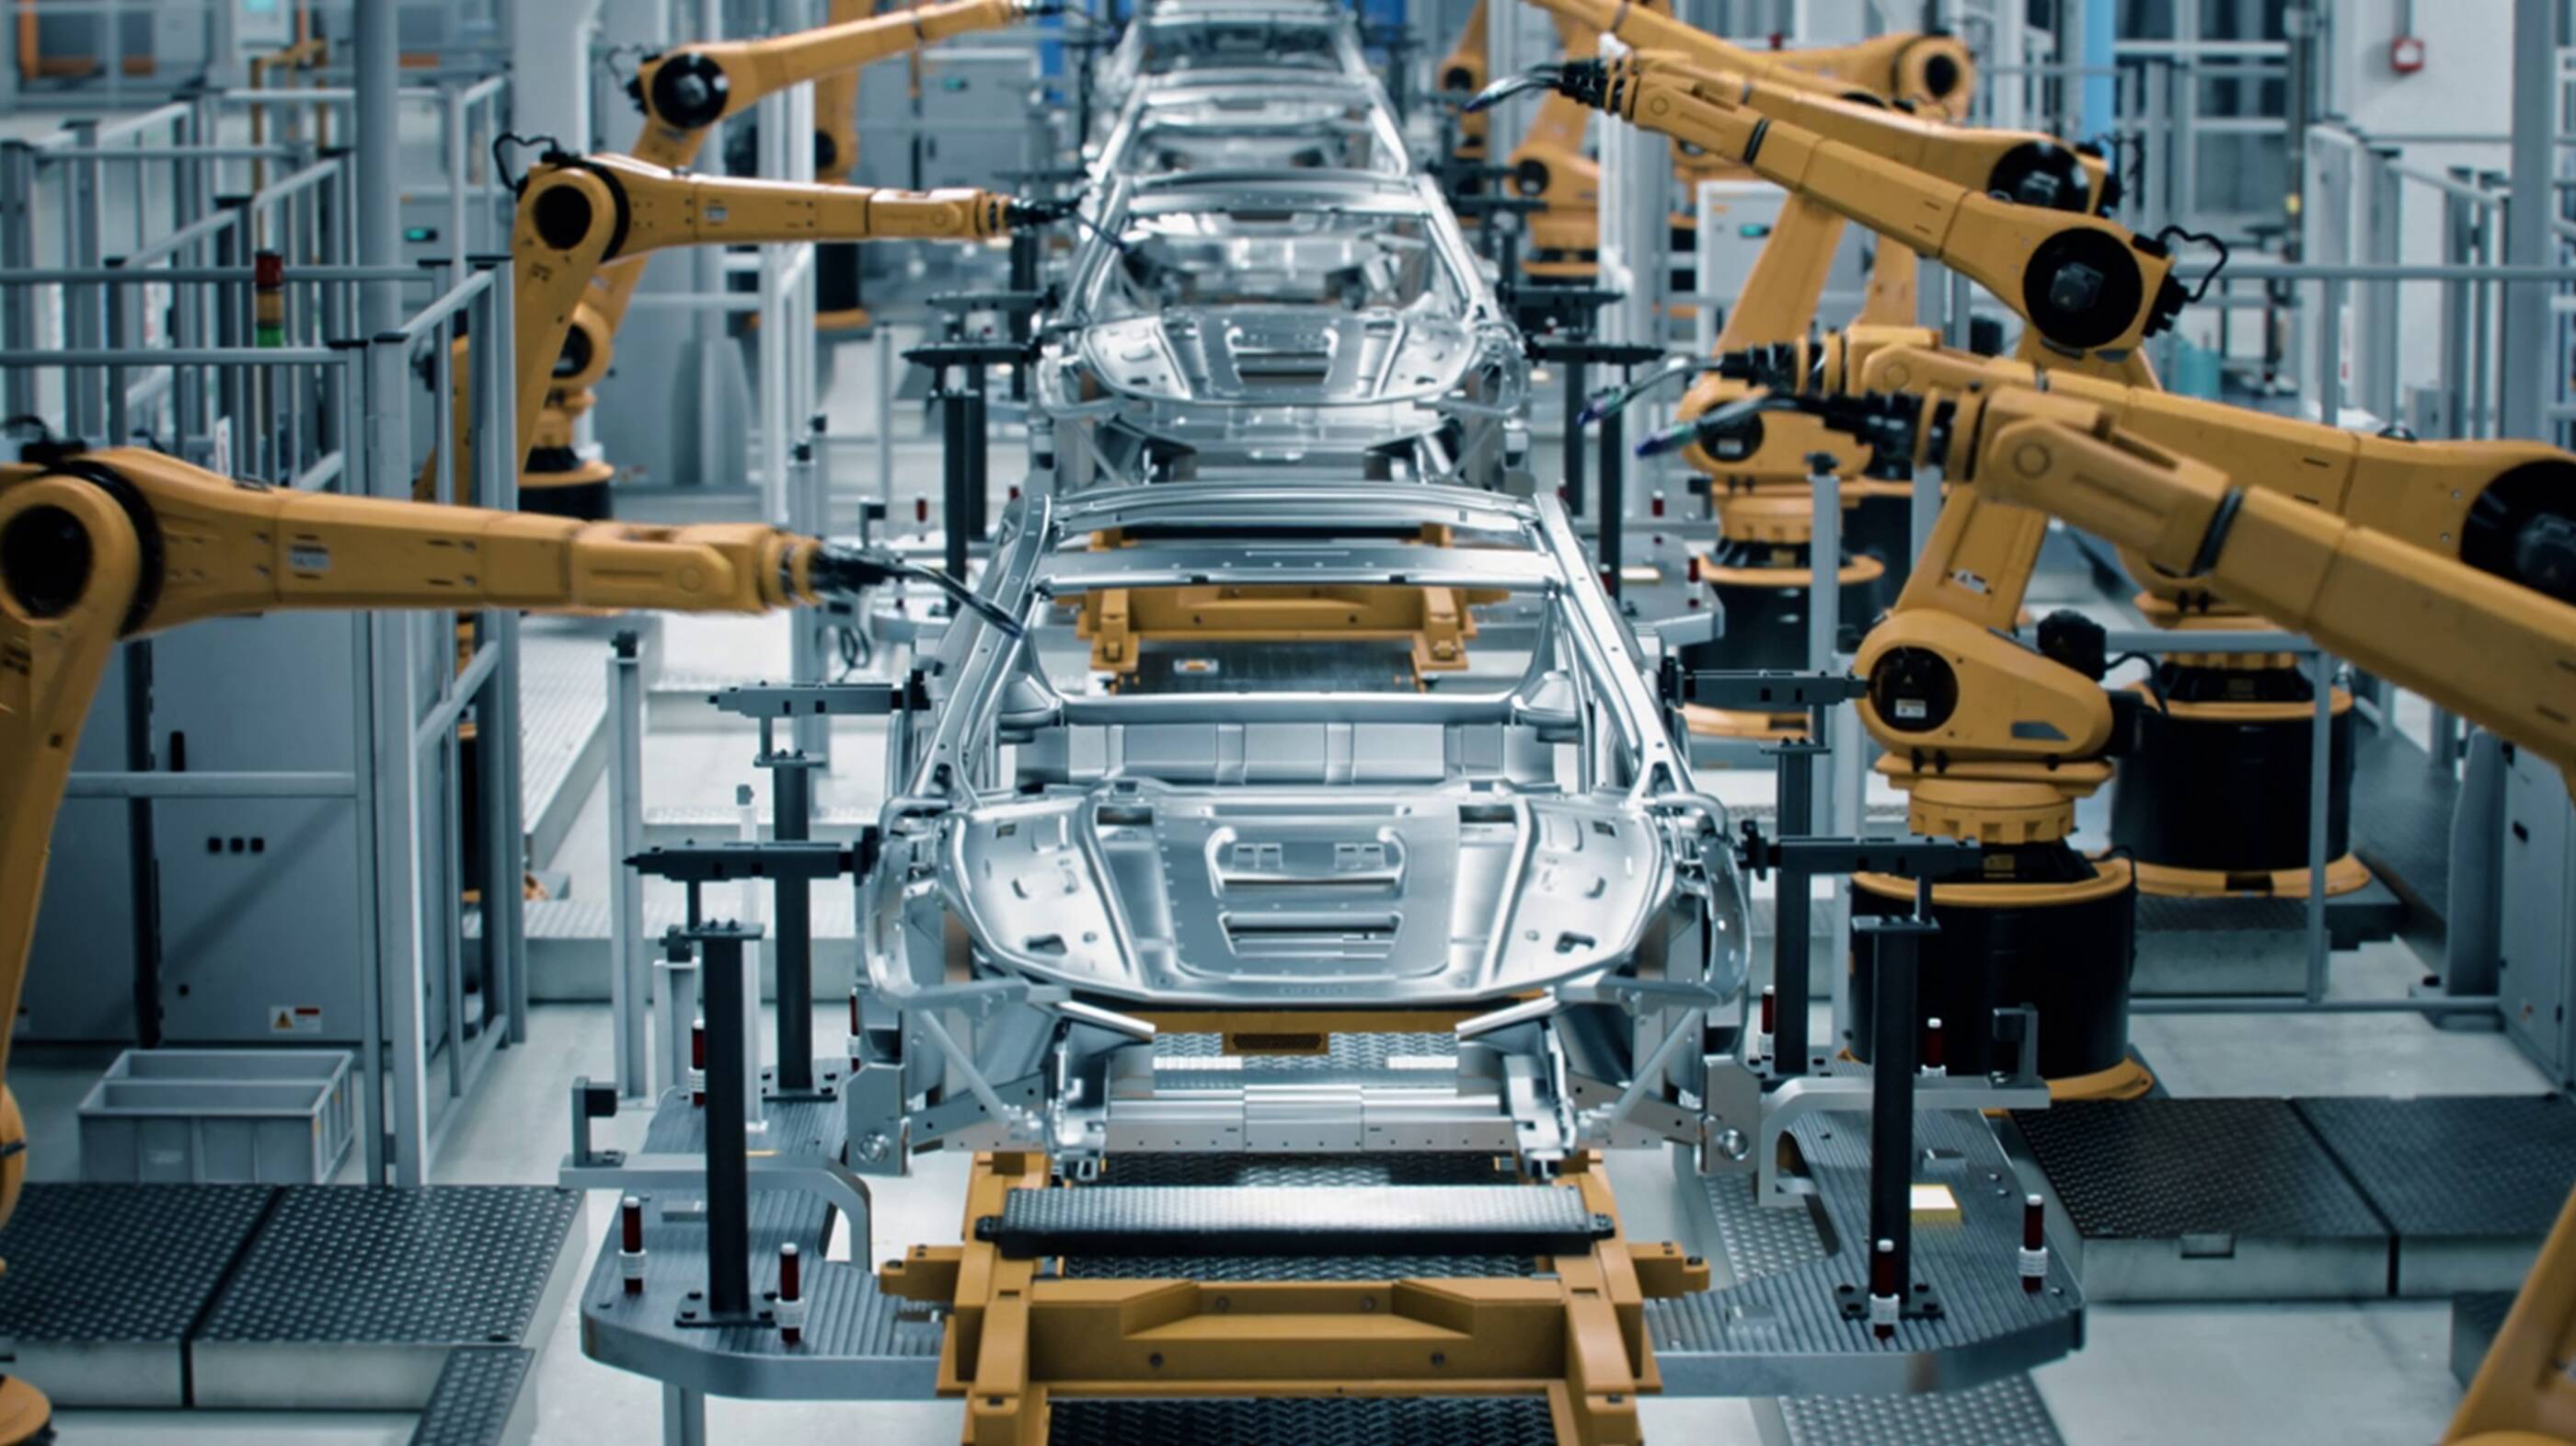 Robotic assembly line for electric vehicle manufacturing to demonstrate ExxonMobil getting into lithium technology as a low carbon solution.